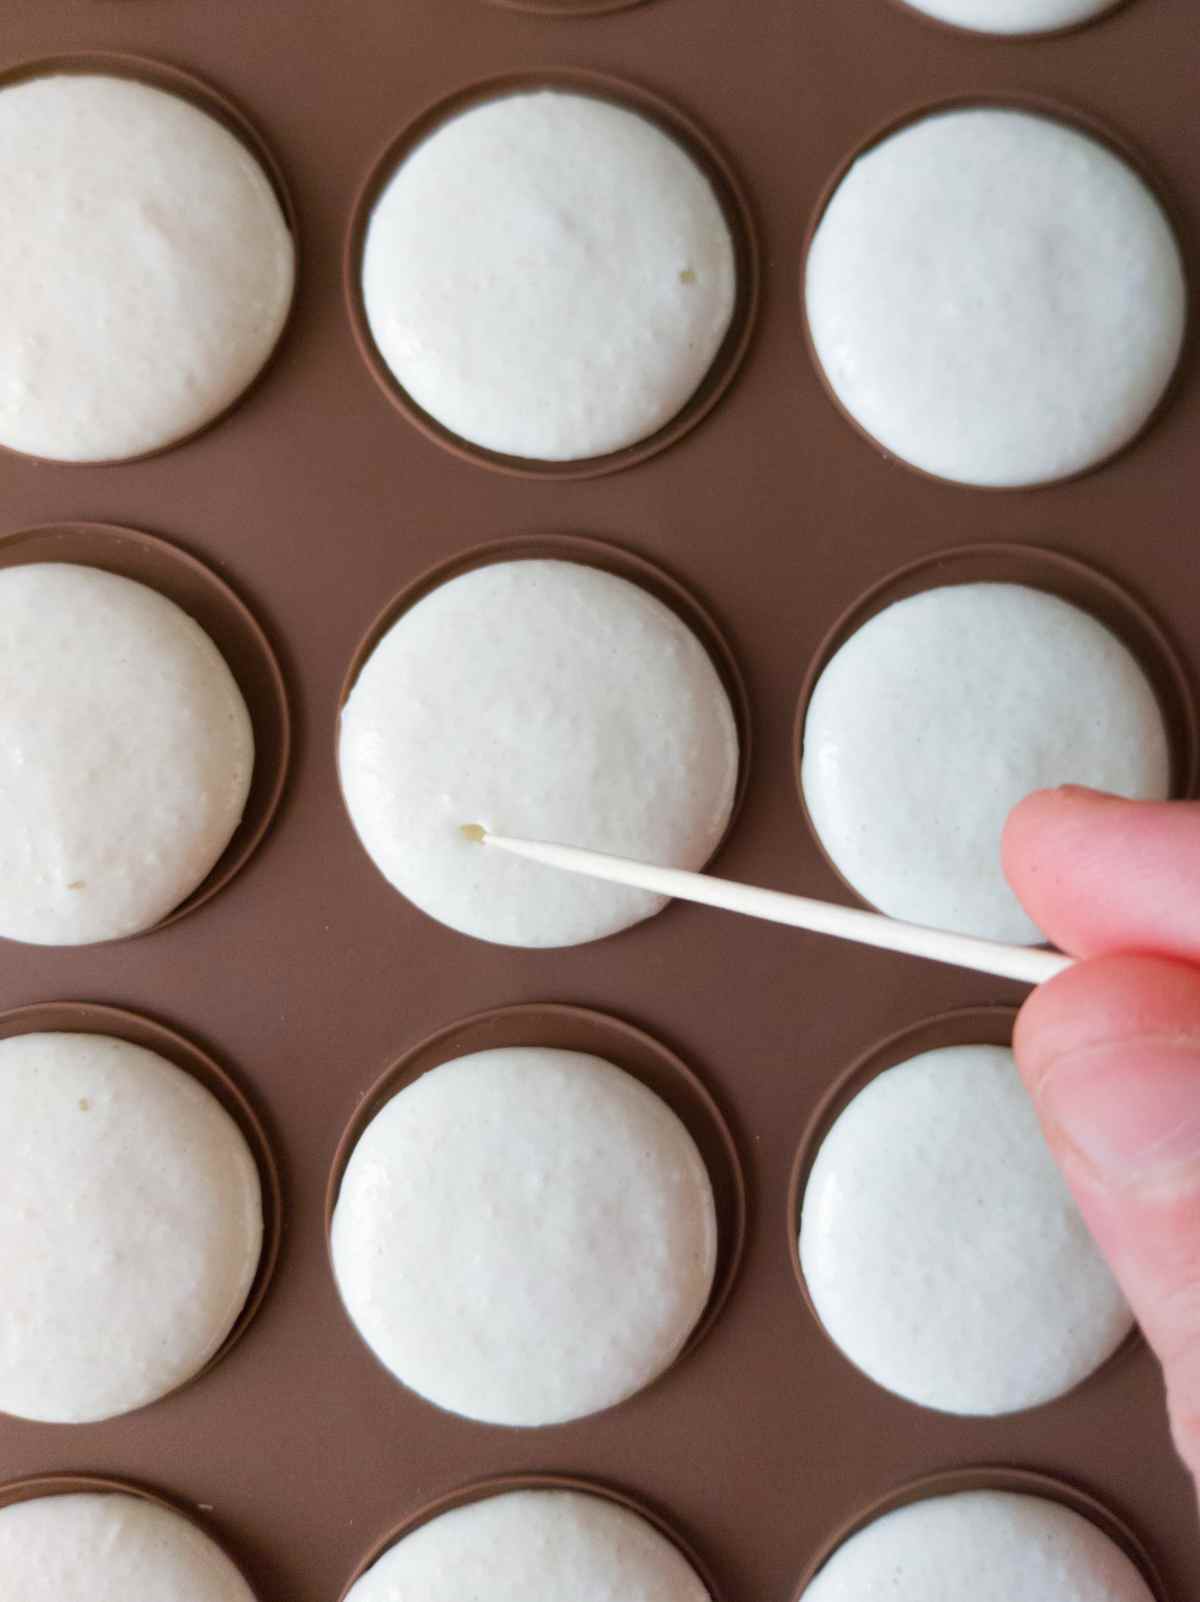 Piped macaron shells on a silicone mat with a toothpick popping bubbles.